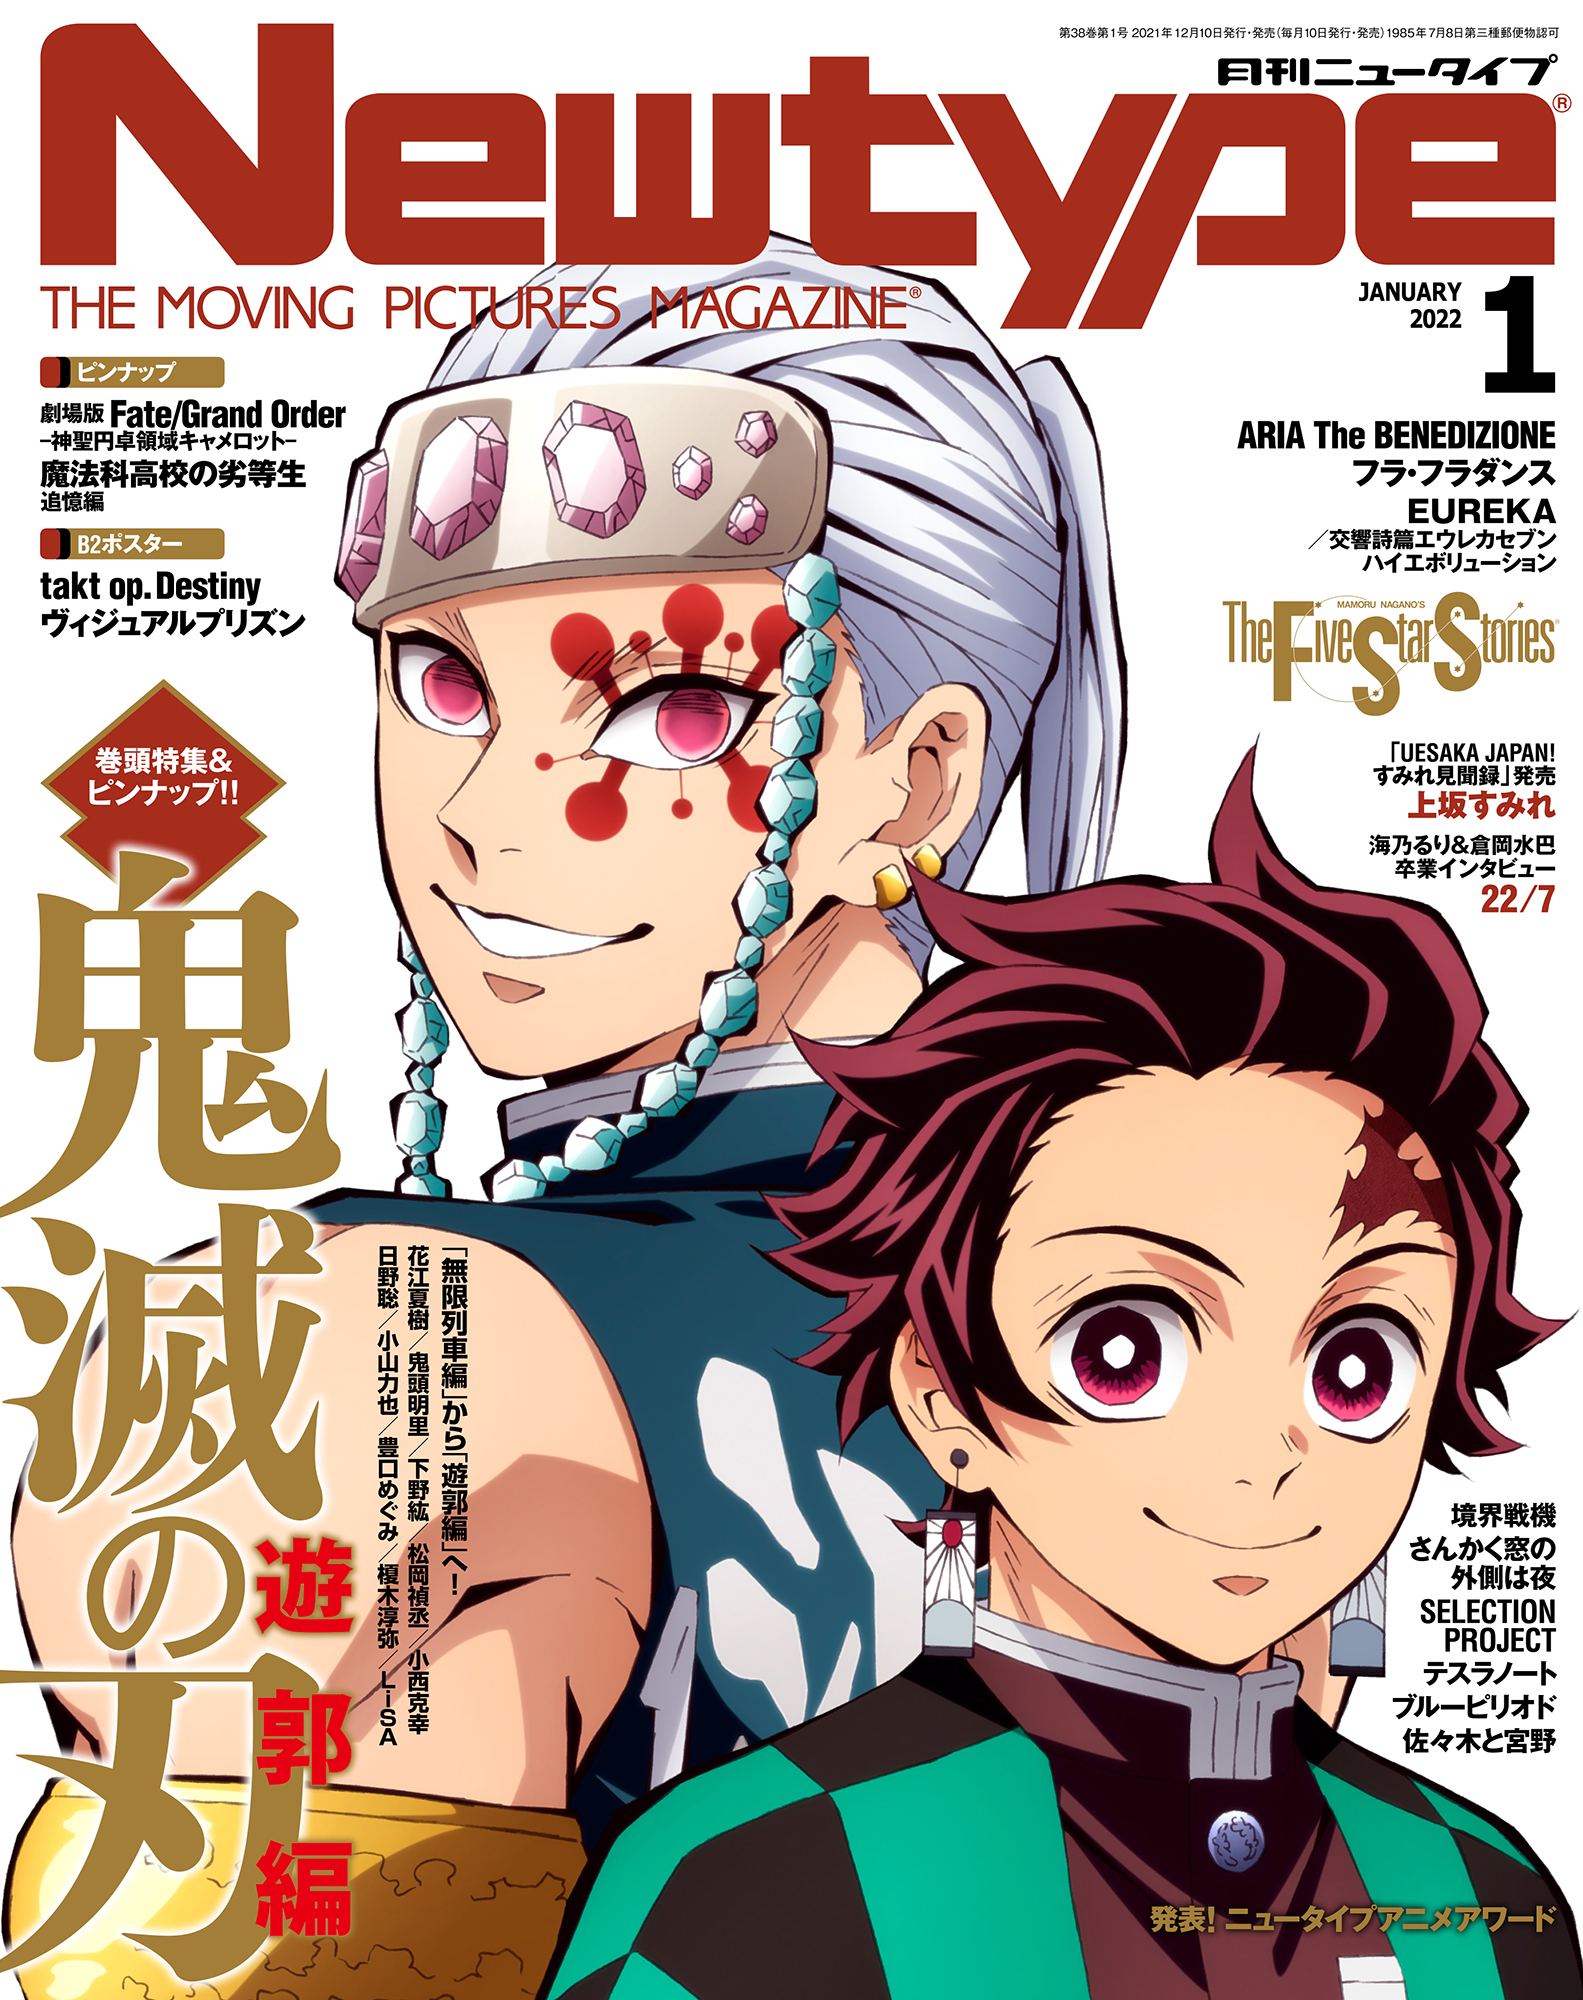 Are there other English versions of weekly manga magazines besides Shonen  Jump? - Anime & Manga Stack Exchange